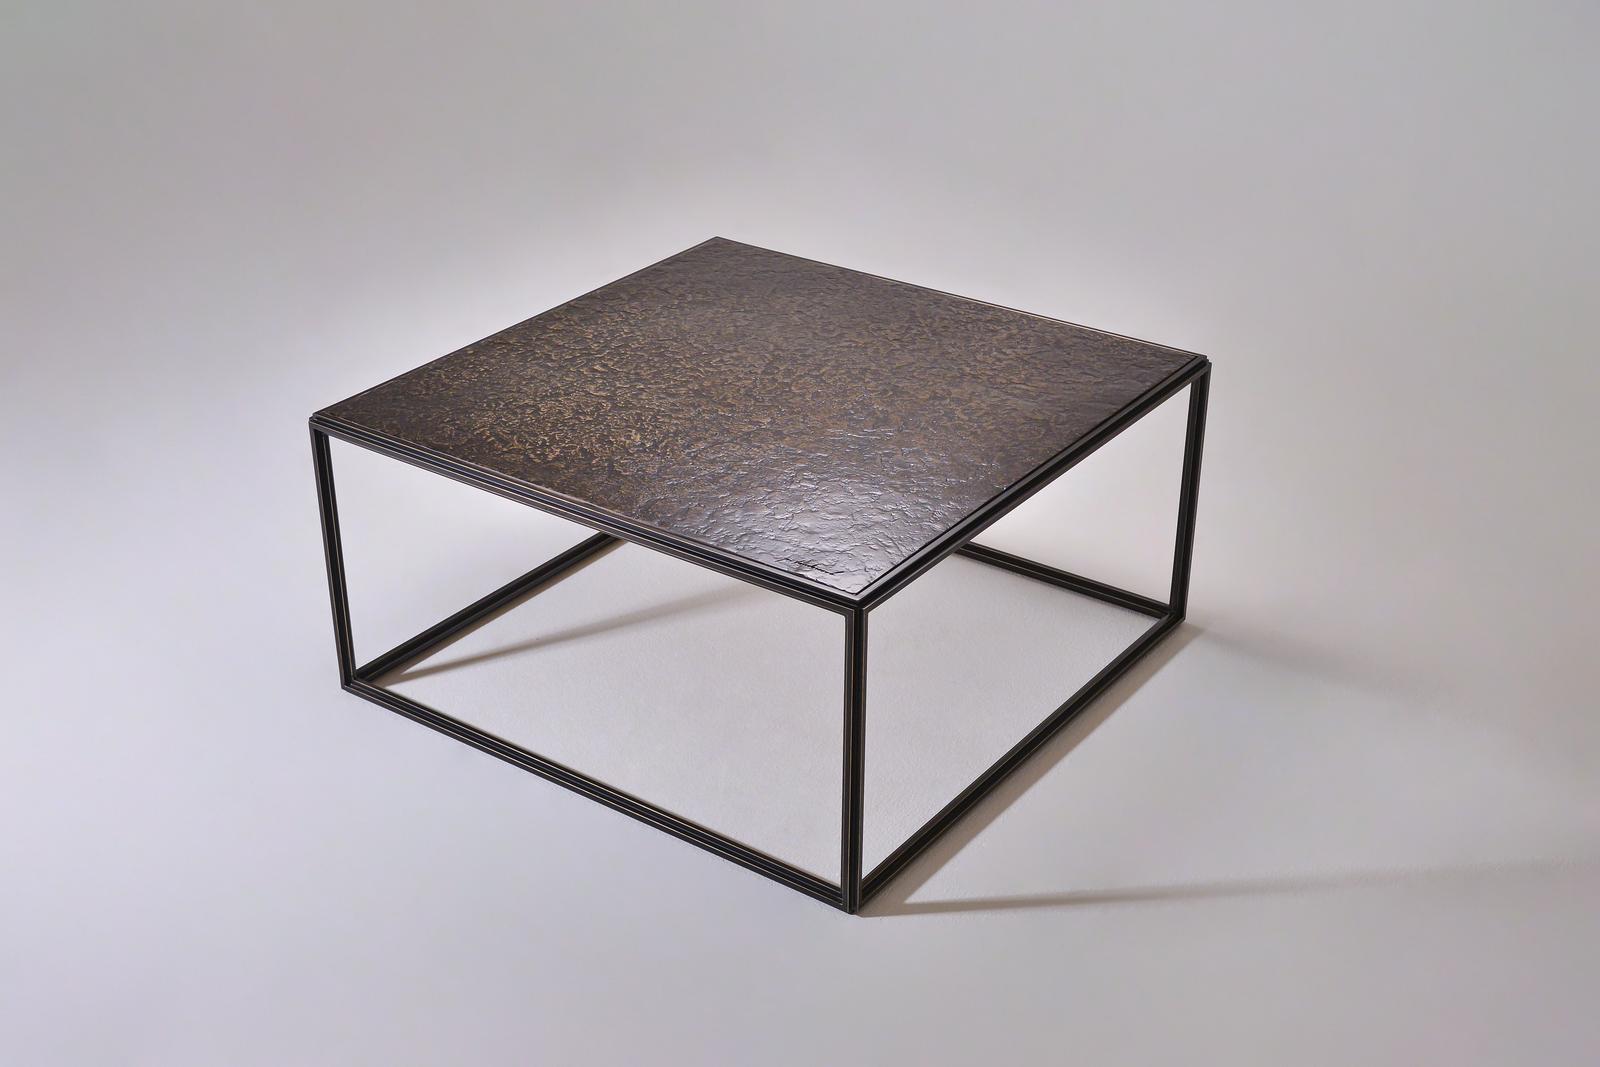 We love this play of contrasts in this version of our PT6 Bronze Low Table.

Inspired by the modernists we created this cubist table in extruded brushed brass and hand-welded profiles and topped it off with a sand-cast top in Textured bronze and to